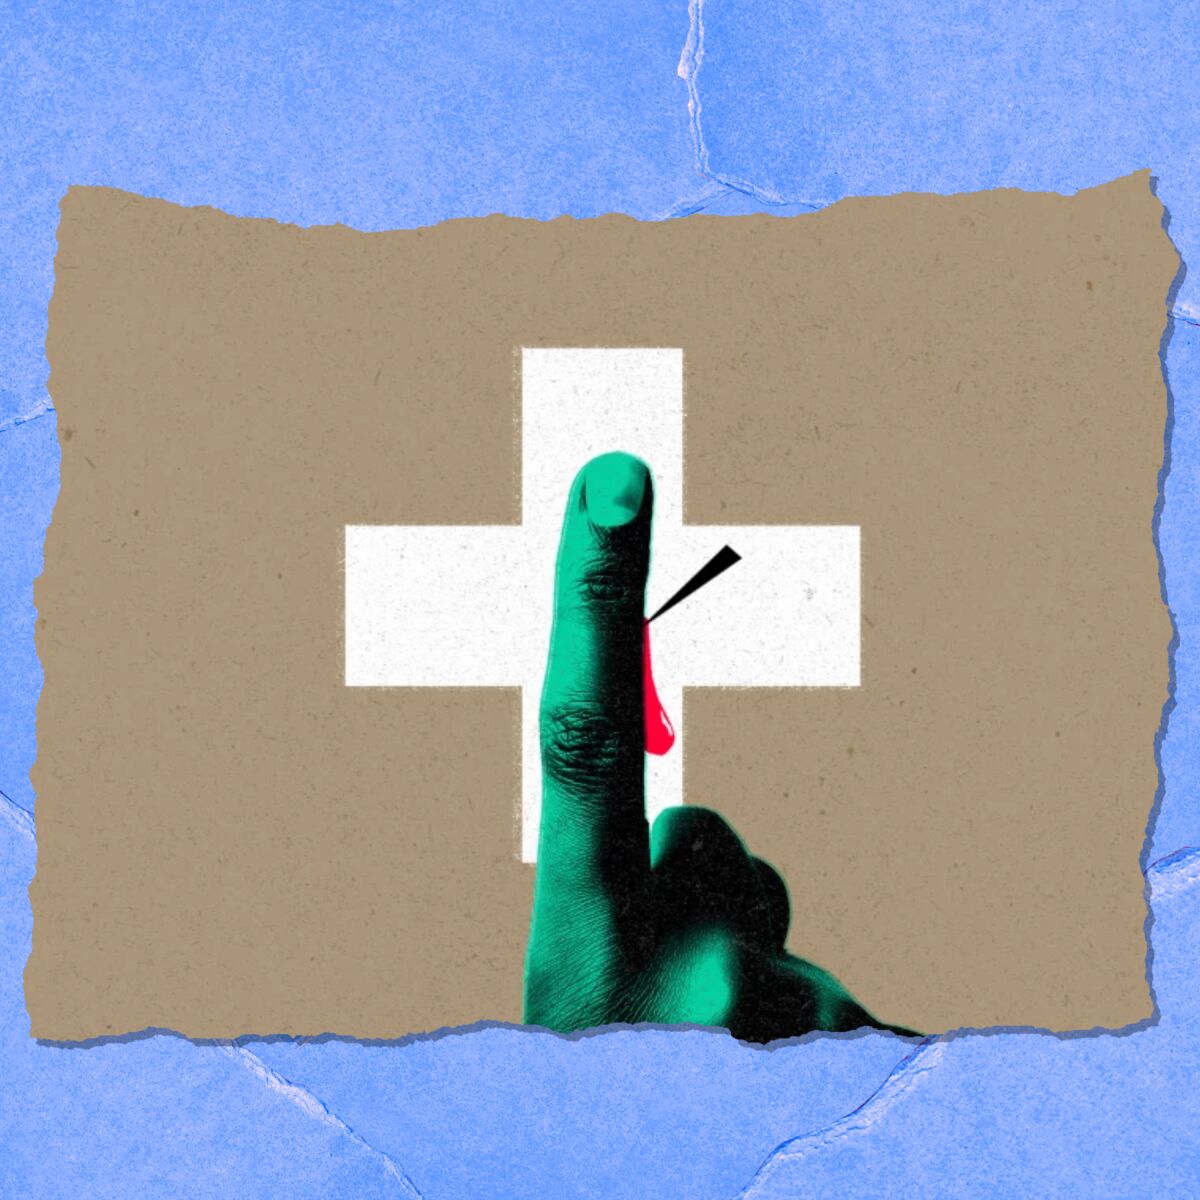 An illustration shows a person holding up a forefinger with a cactus poking out and a drop of blood falling.